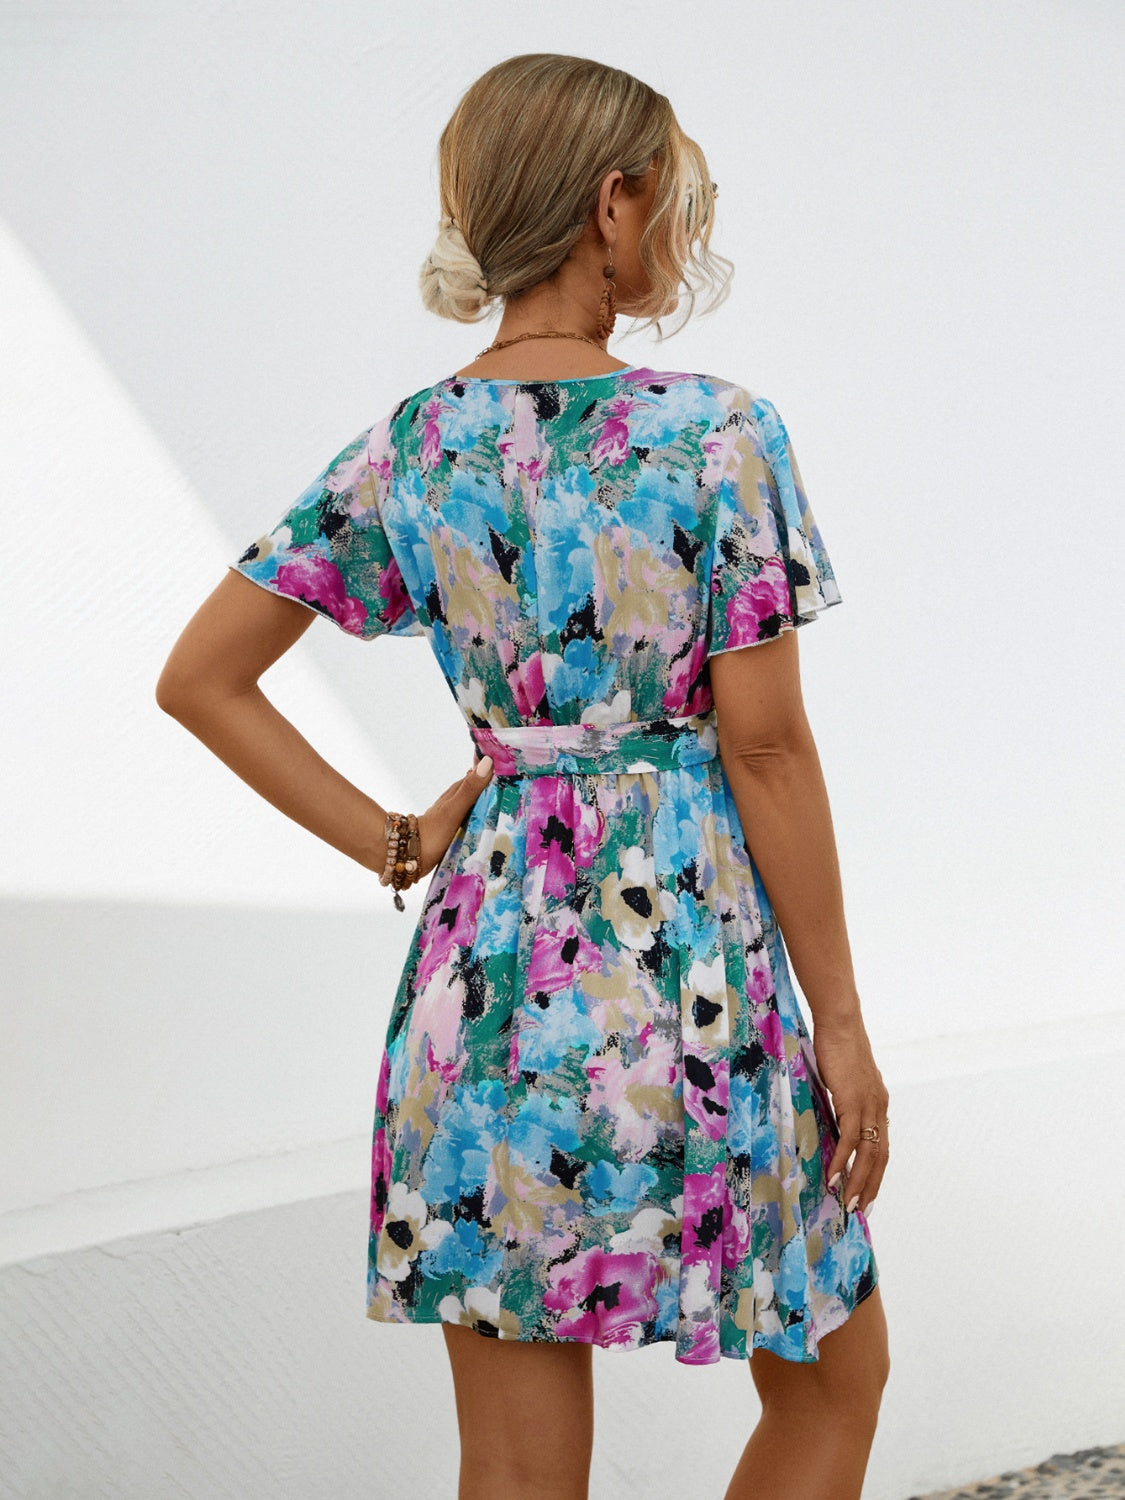 Shop the Printed Surplice Tie Waist Mini Dress – perfect blend of elegance, comfort, and vibrant style for any spring occasion.